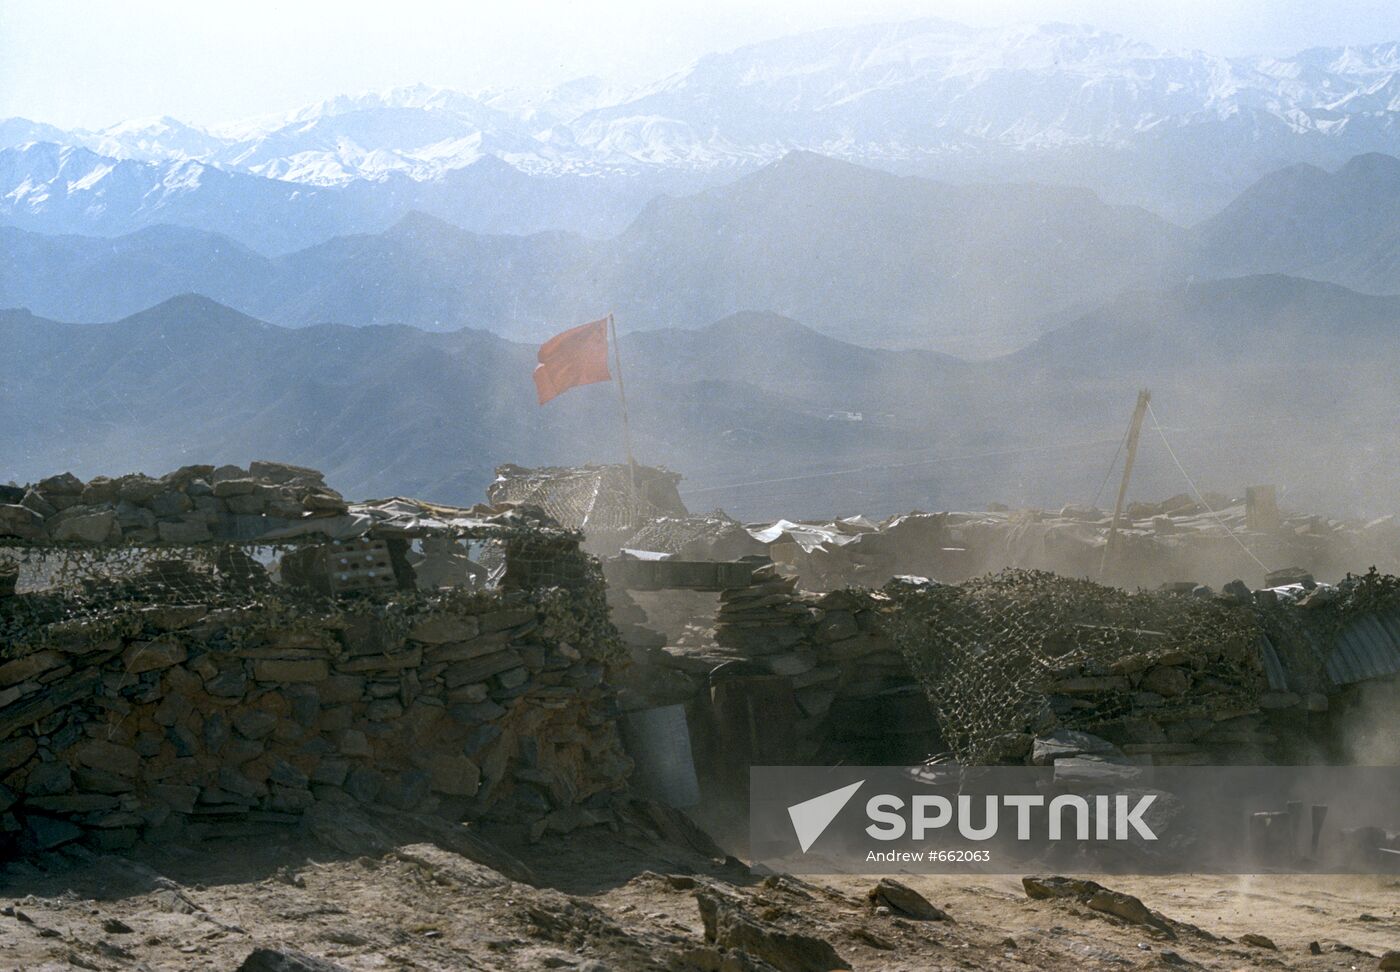 Outpost of Soviet limited troops contingent in Afghanistan